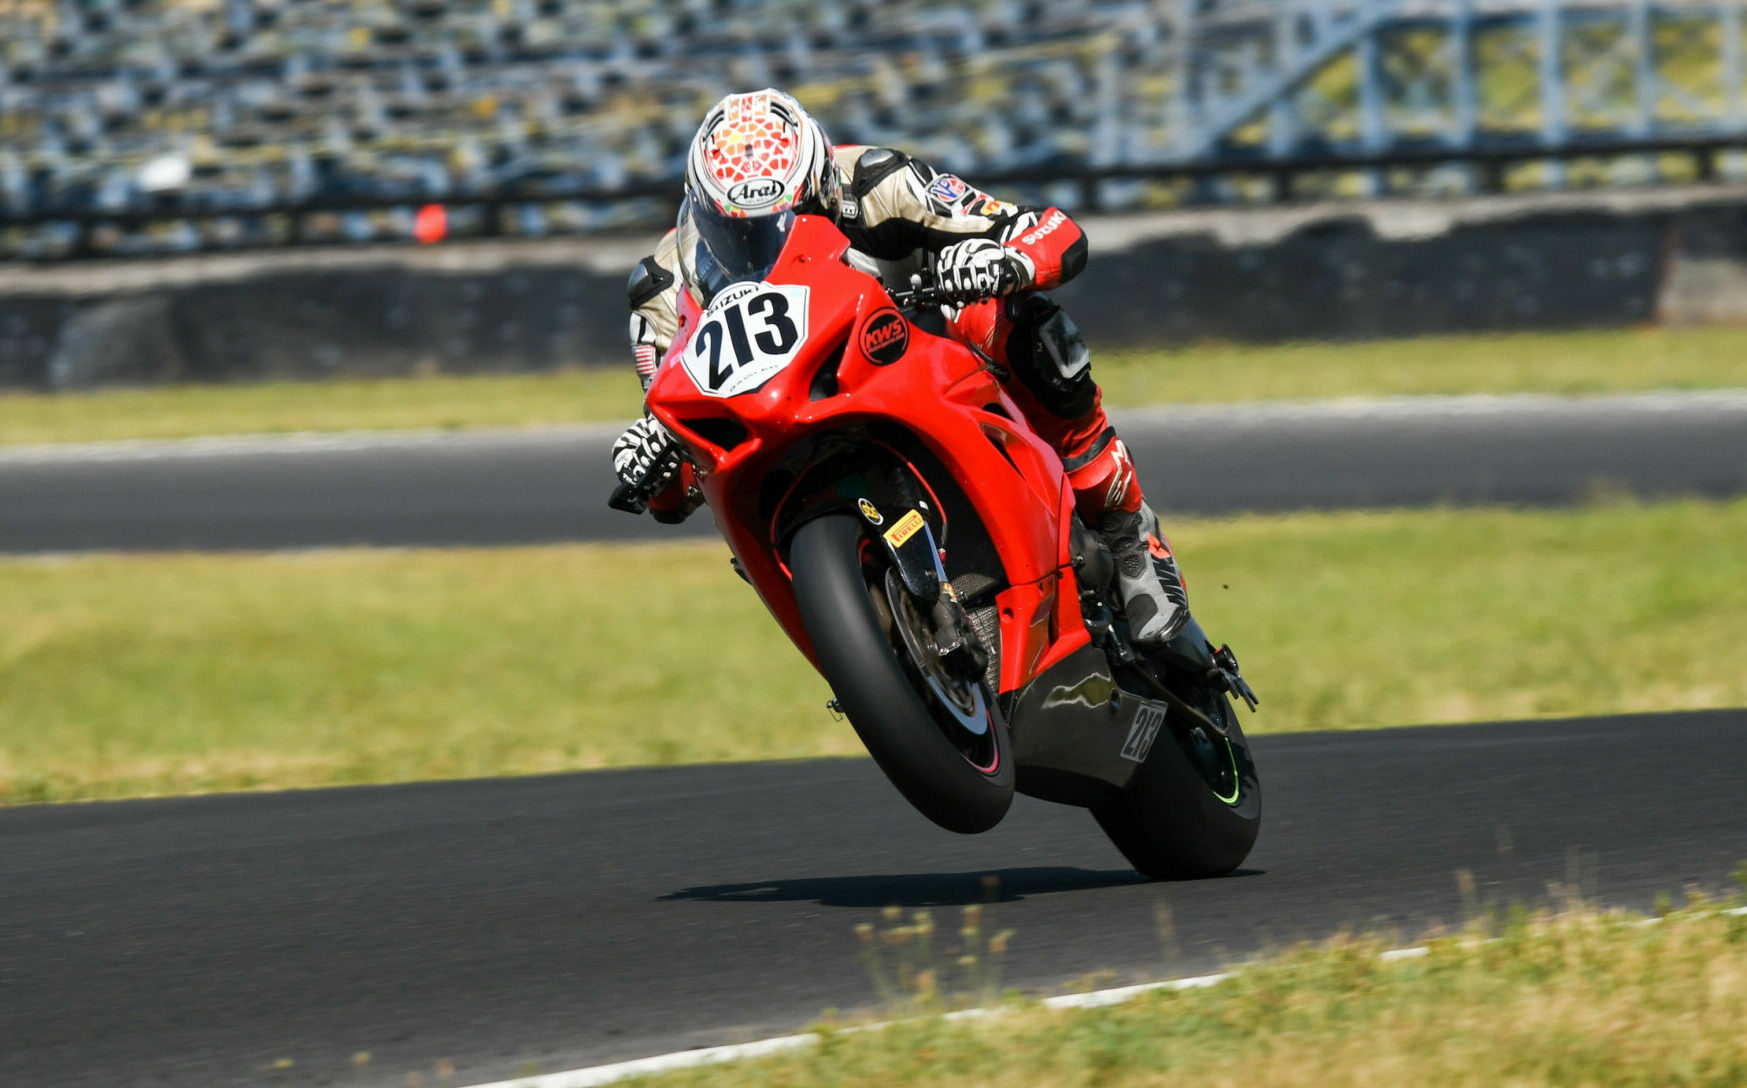 Will Gawler (213) in action at Summit Point. Photo by www.formerinstants.com, courtesy ASRA.